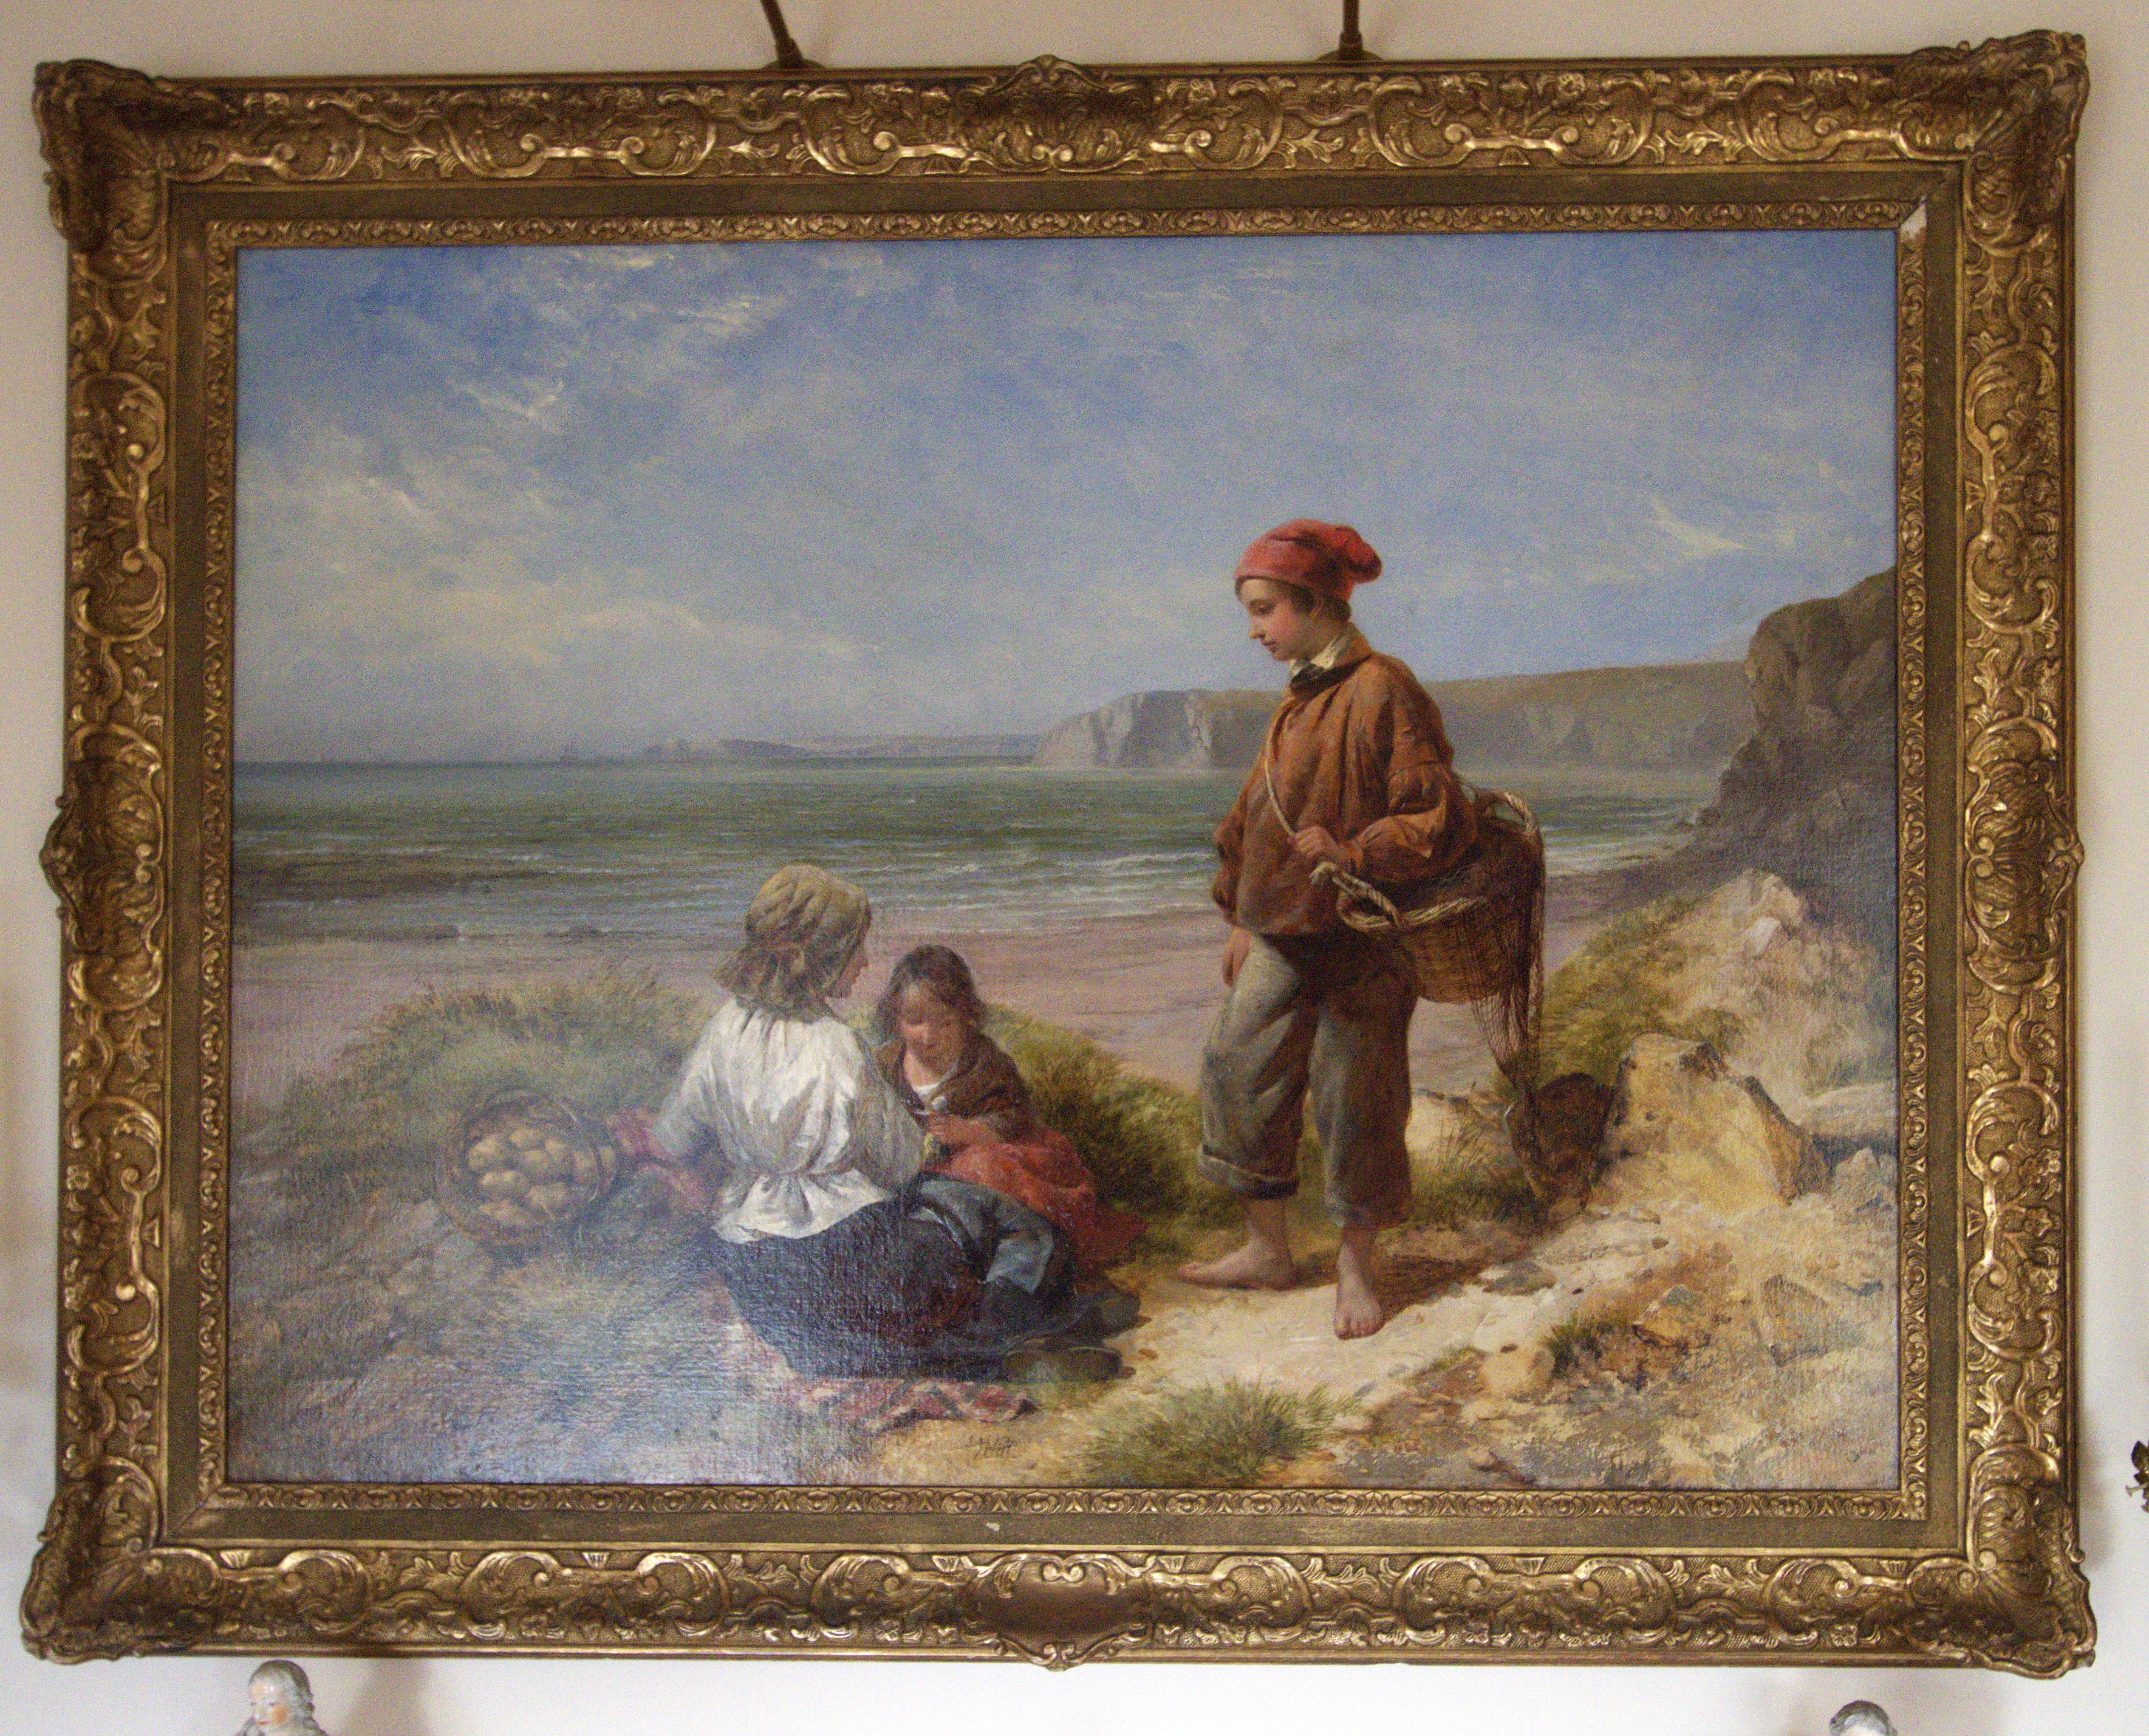 This is the finest painting we have ever seen by James John Hill (1811-1882).
Children playing beside the beach
Signed
Oil on Canvas
75cms x 100cms 
Framed
